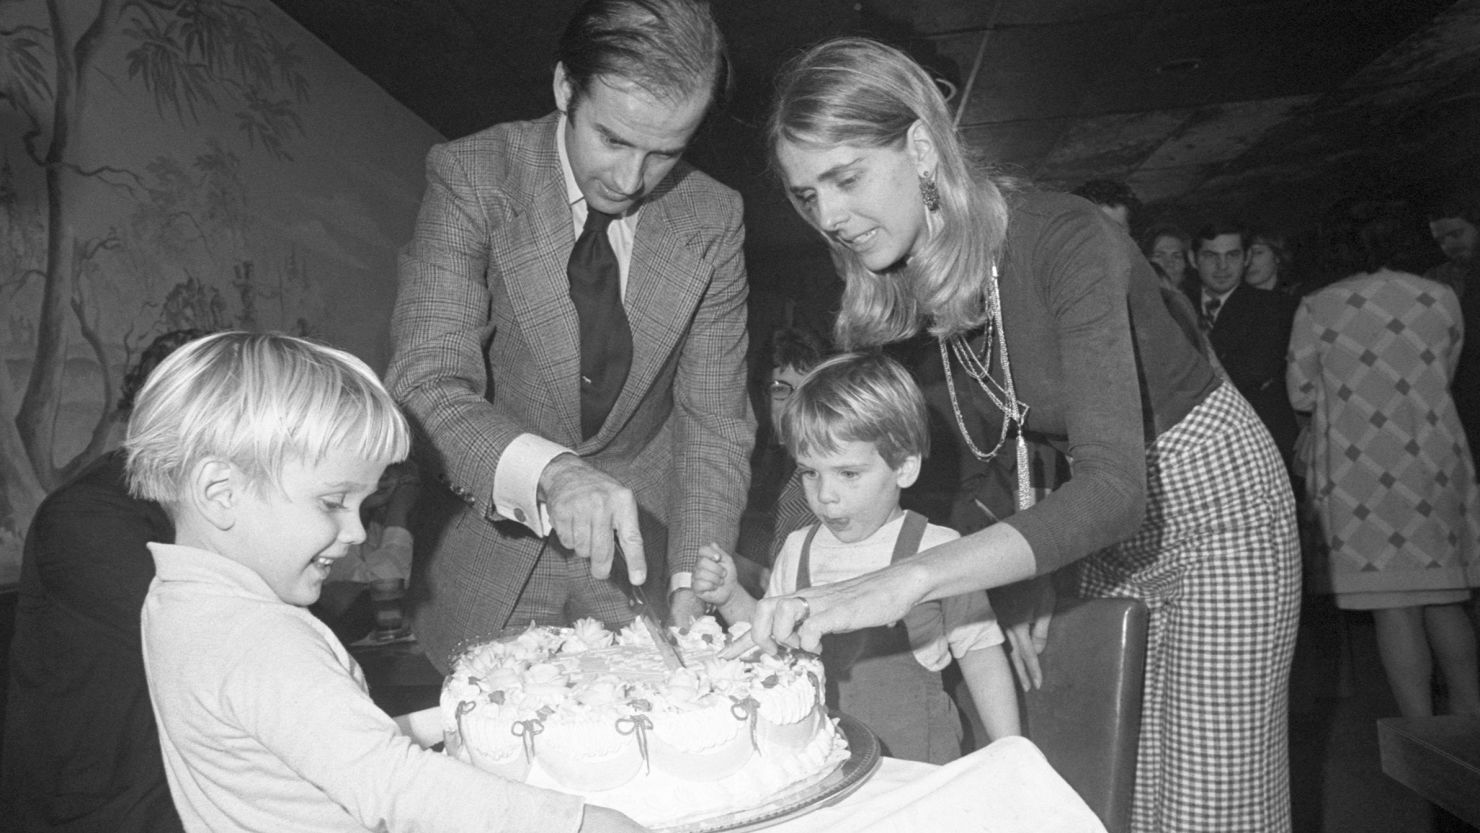 Joe Biden and his first wife, Neilia, cut his 30th birthday cake at a party in Wilmington, Delaware, in November 1972.